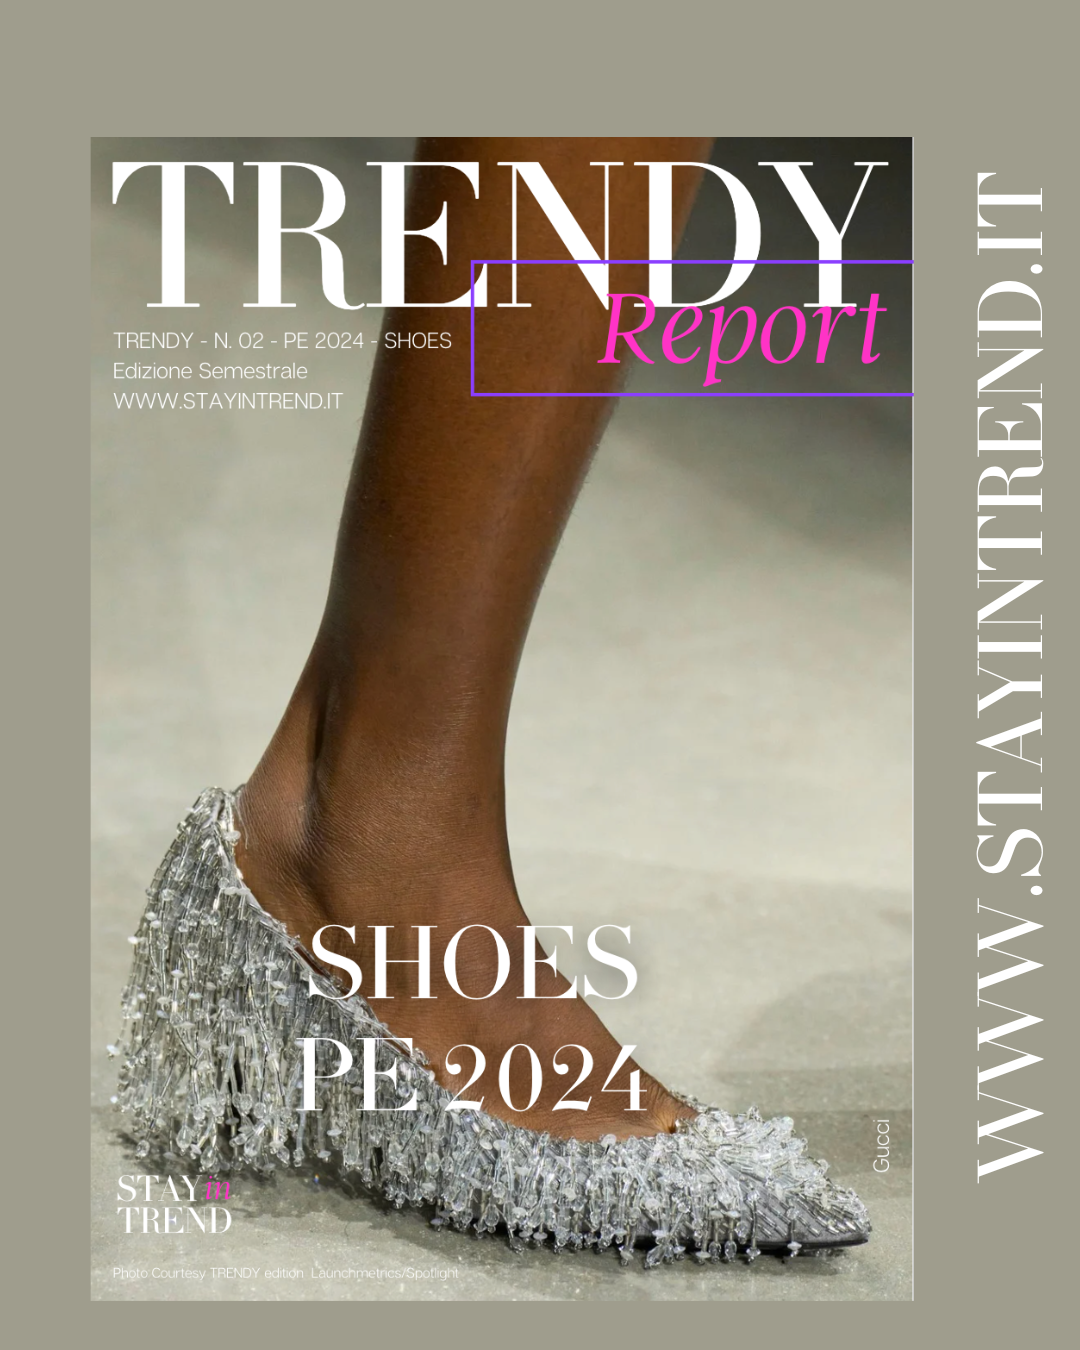 Trendy report shoes